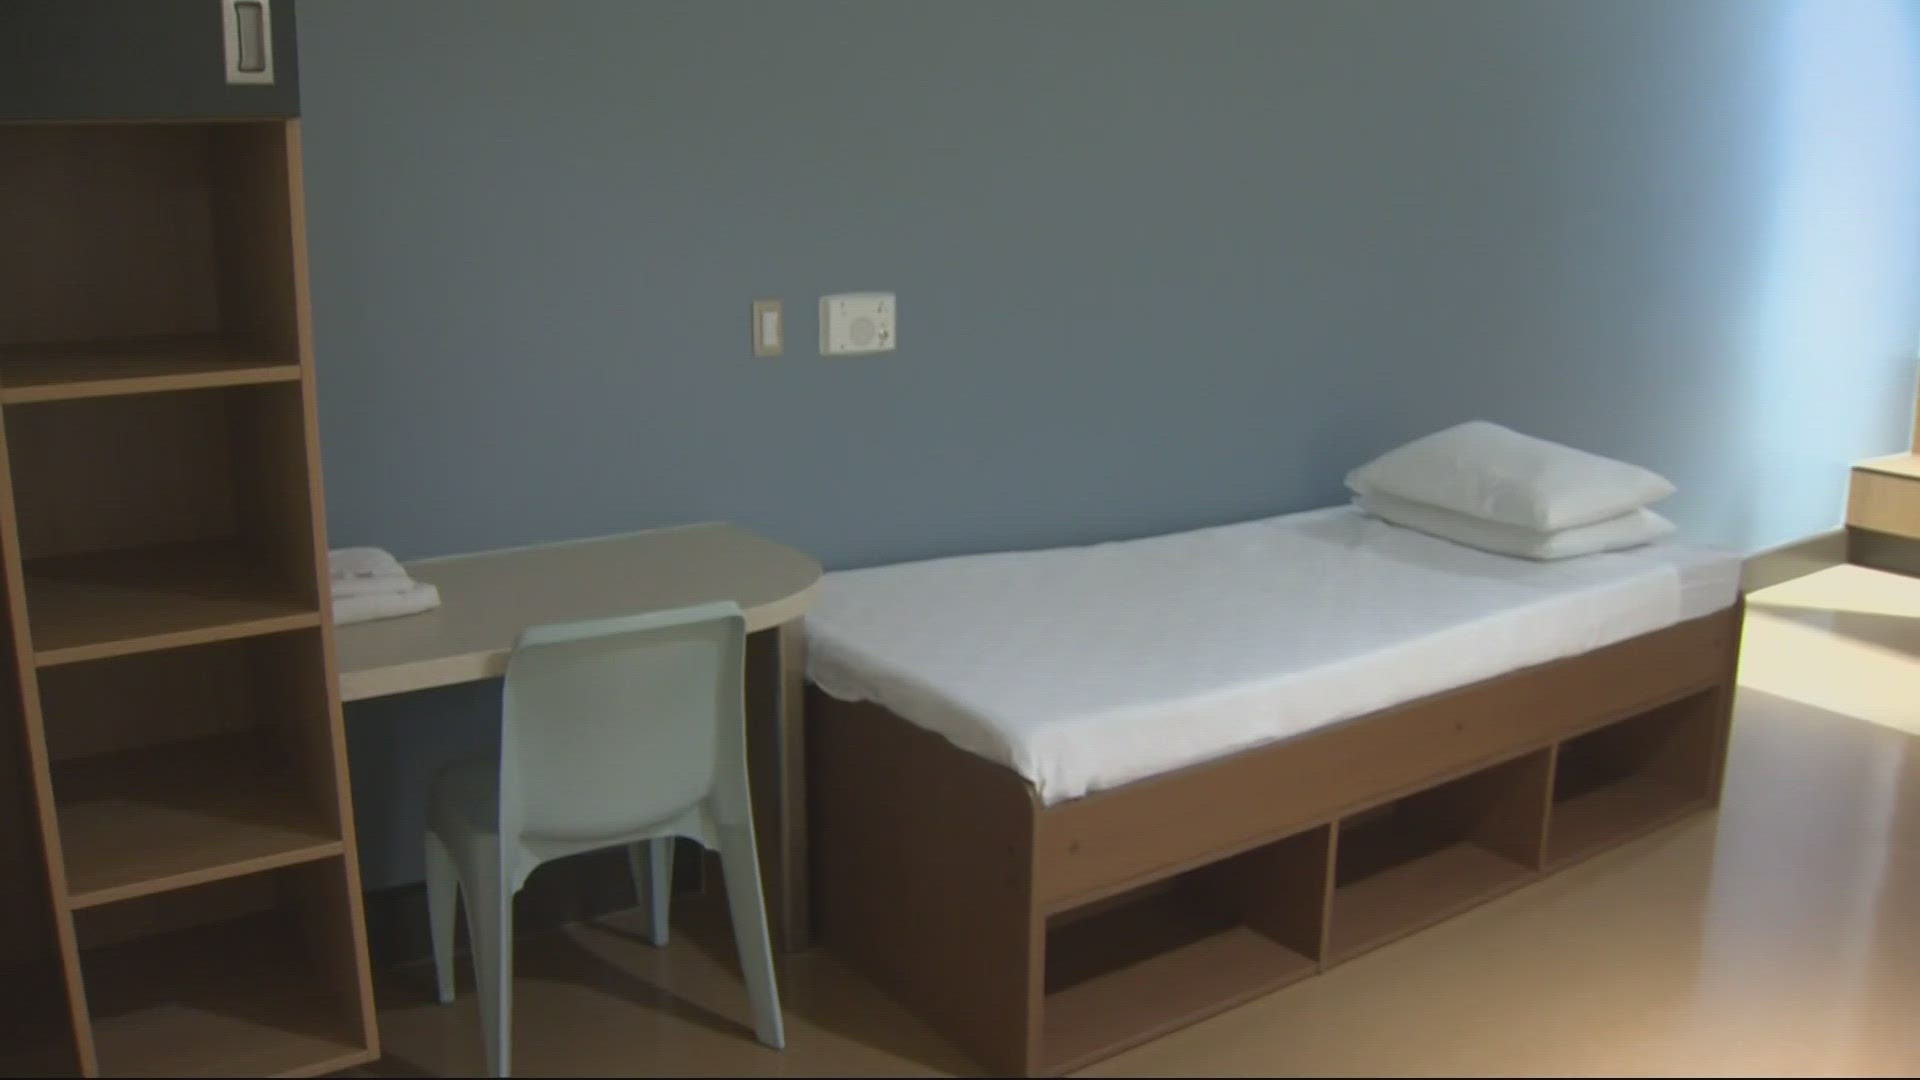 The $330,000 initiative would add nine new sobering beds at the Unity Center’s psychiatric hospital. Addiction treatment is in high demand in Portland.